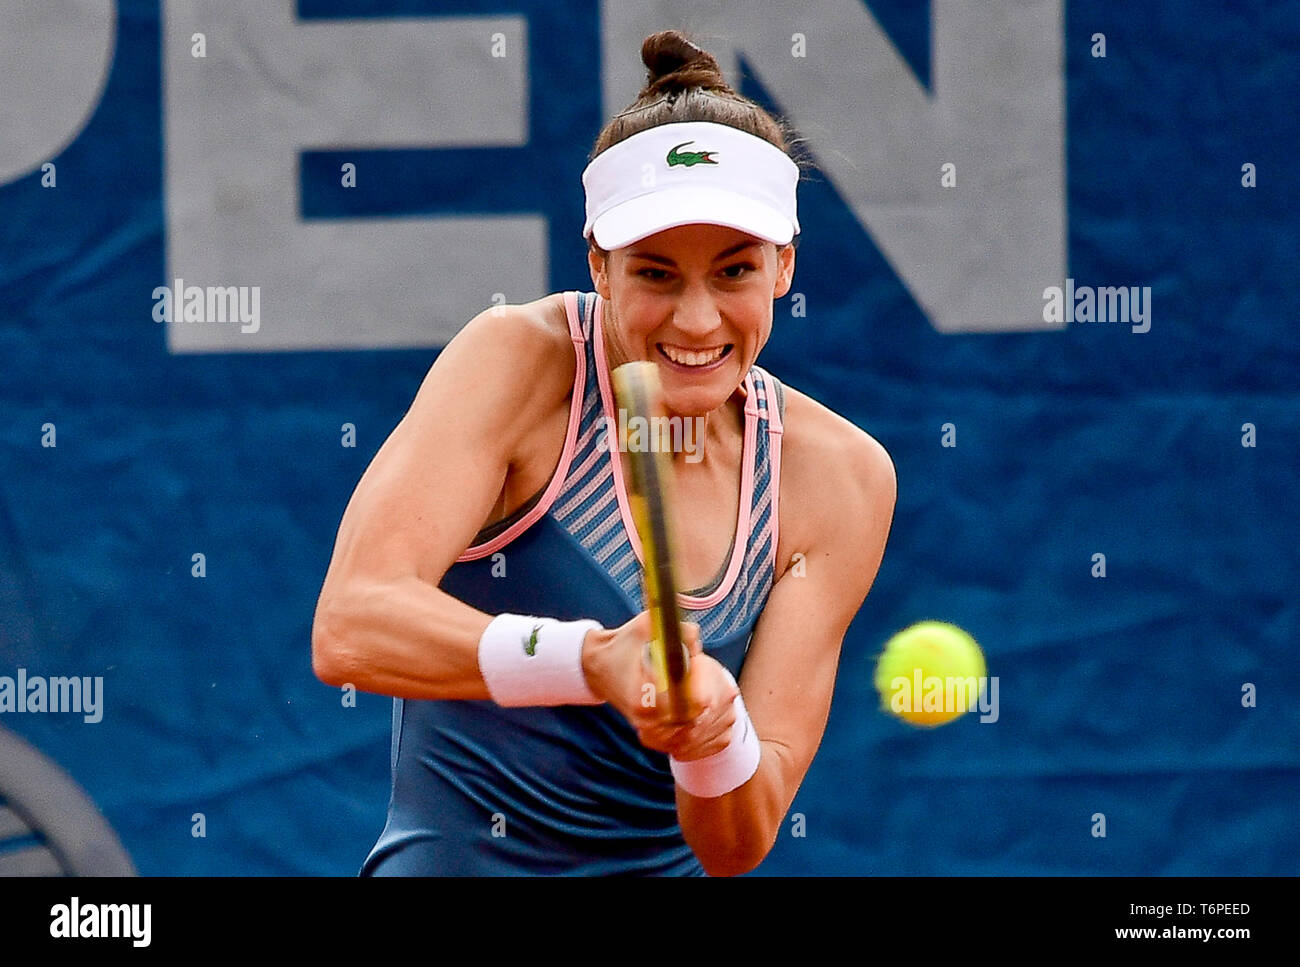 Prague, Czech Republic. 02nd May, 2019. Tennis player Bernada Pera of USA in action during the match against Wang Qiang of China in Prague Open women's tennis tournament, Czech Republic, May 2, 2019. Credit: Roman Vondrous/CTK Photo/Alamy Live News Stock Photo